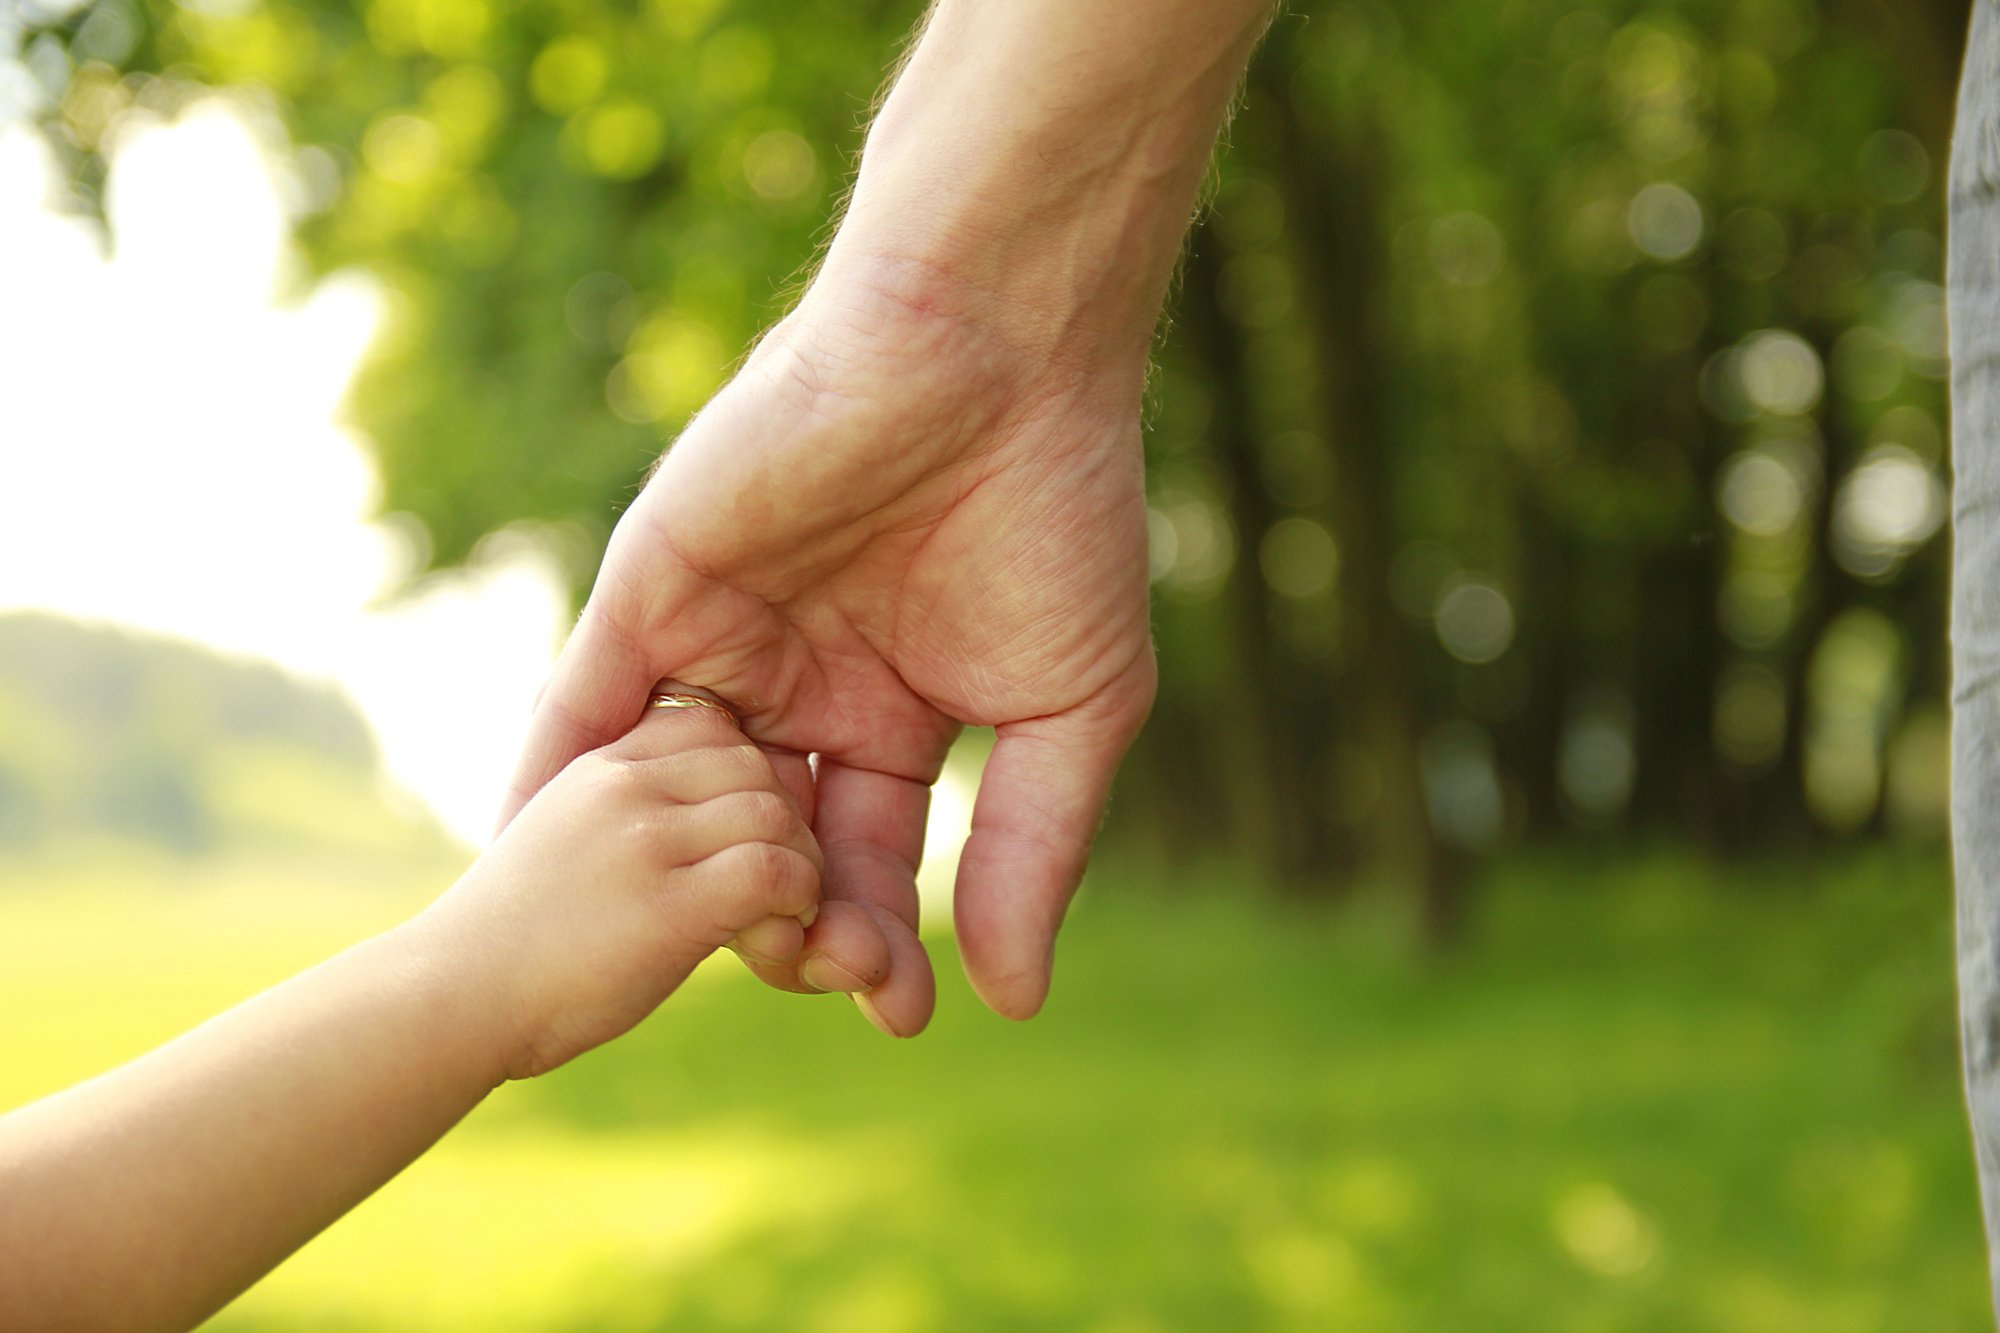 Can I Adopt My Grandchild Without a Lawyer?